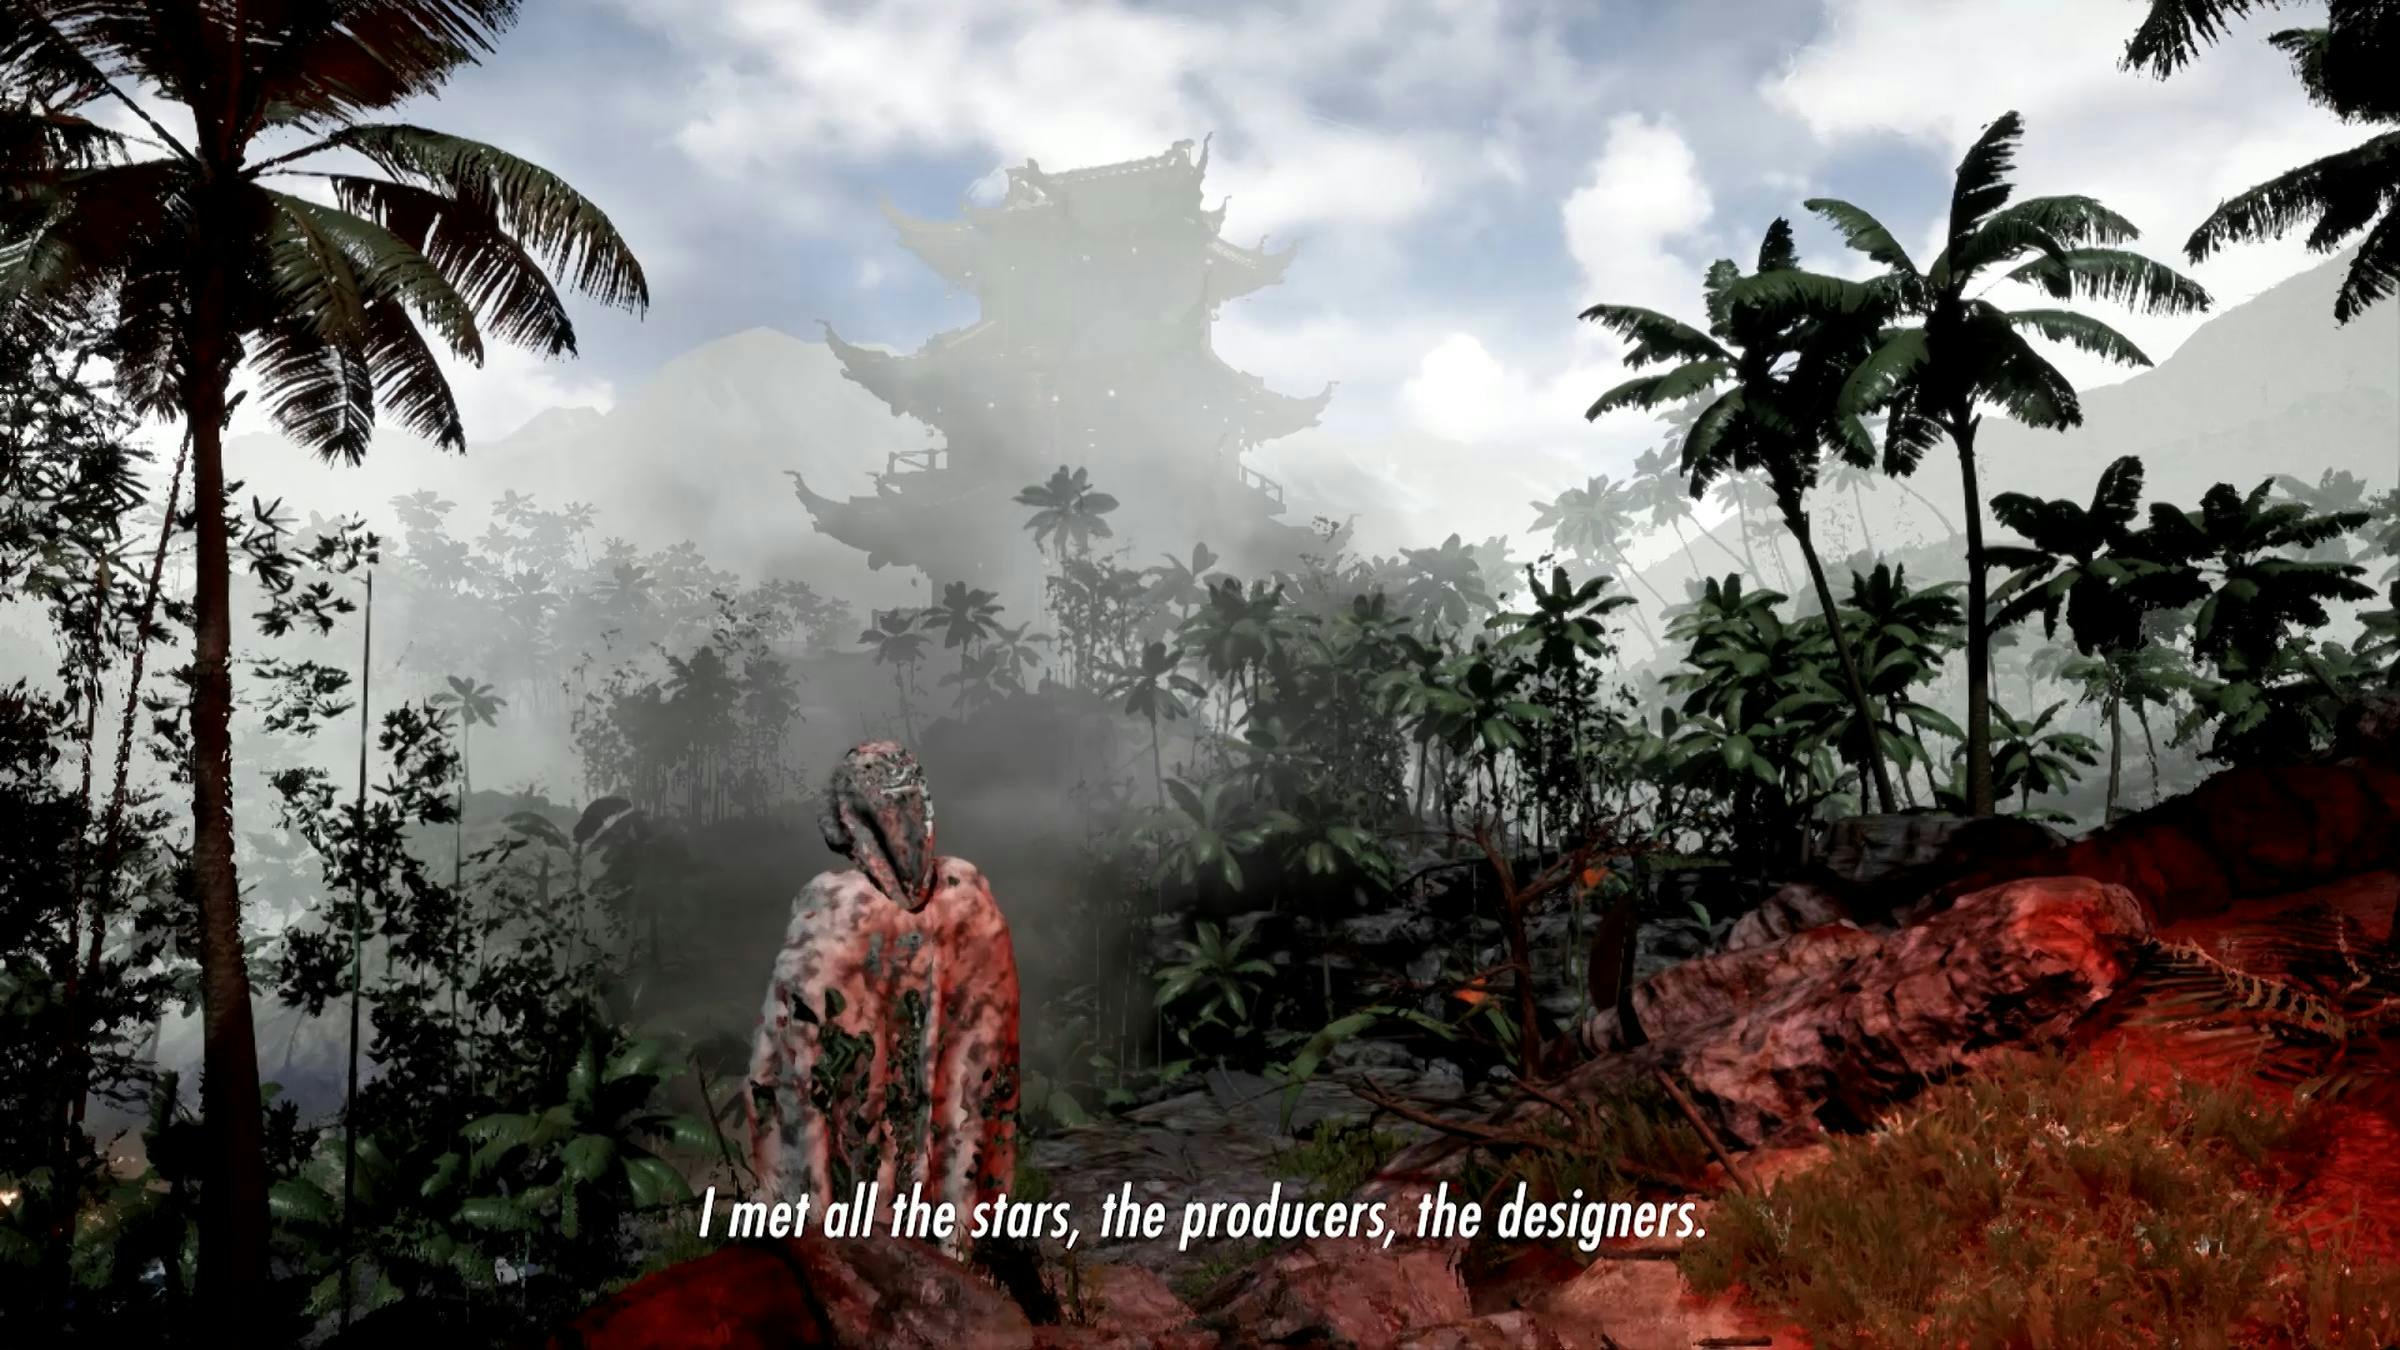 Computer generated image with a figure kneeling in the foreground on rock that has a red light shining on it. There are trees and mist behind the figure. The words 'I met all the stars, the producers, the designers.' are superimposed on top.